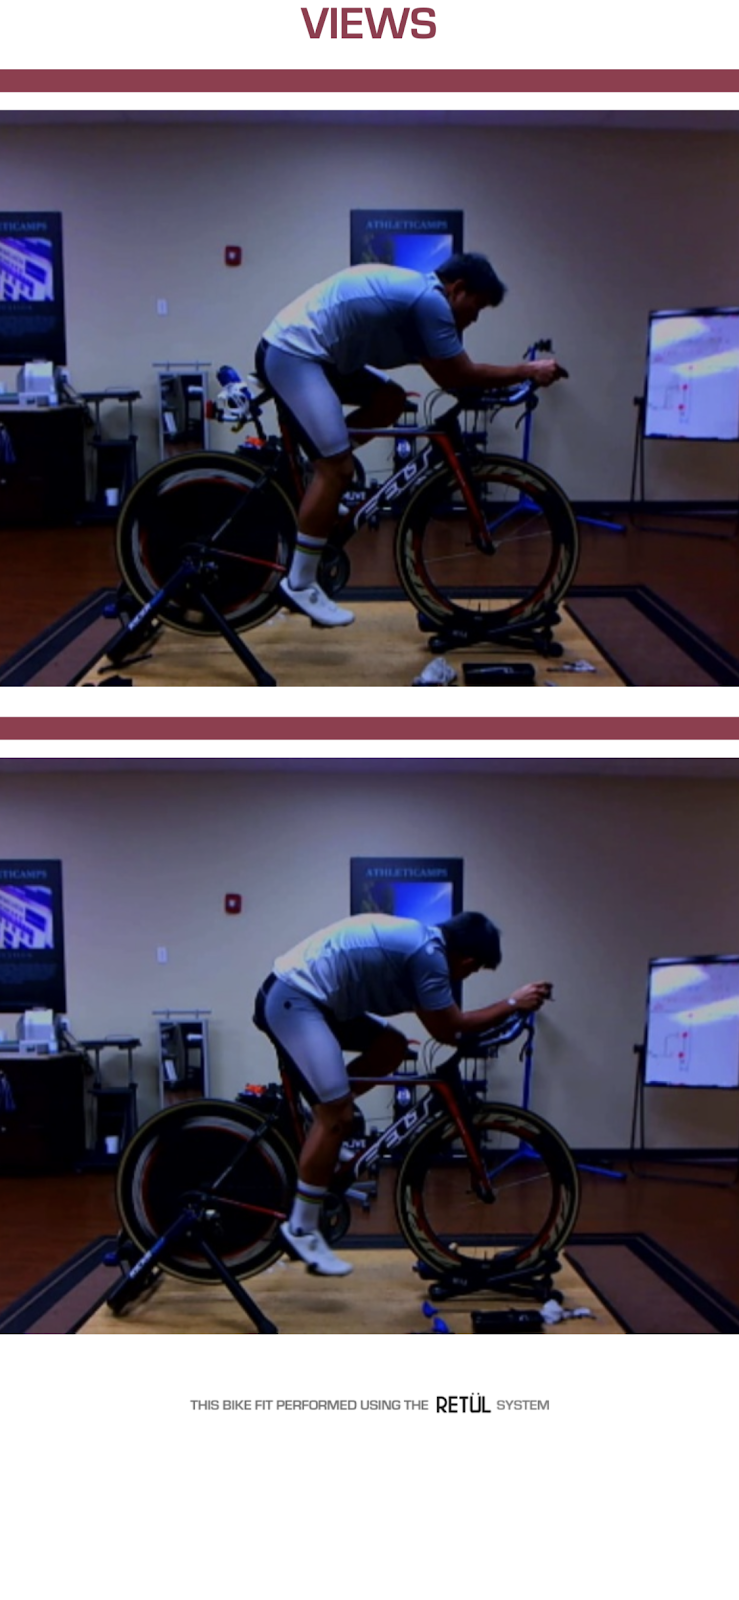 Athleticamps Bike Fitting, Coaching, and Travel | 7700 Folsom-Auburn Rd Suite 130, Folsom, CA 95630 | Phone: (916) 932-0112